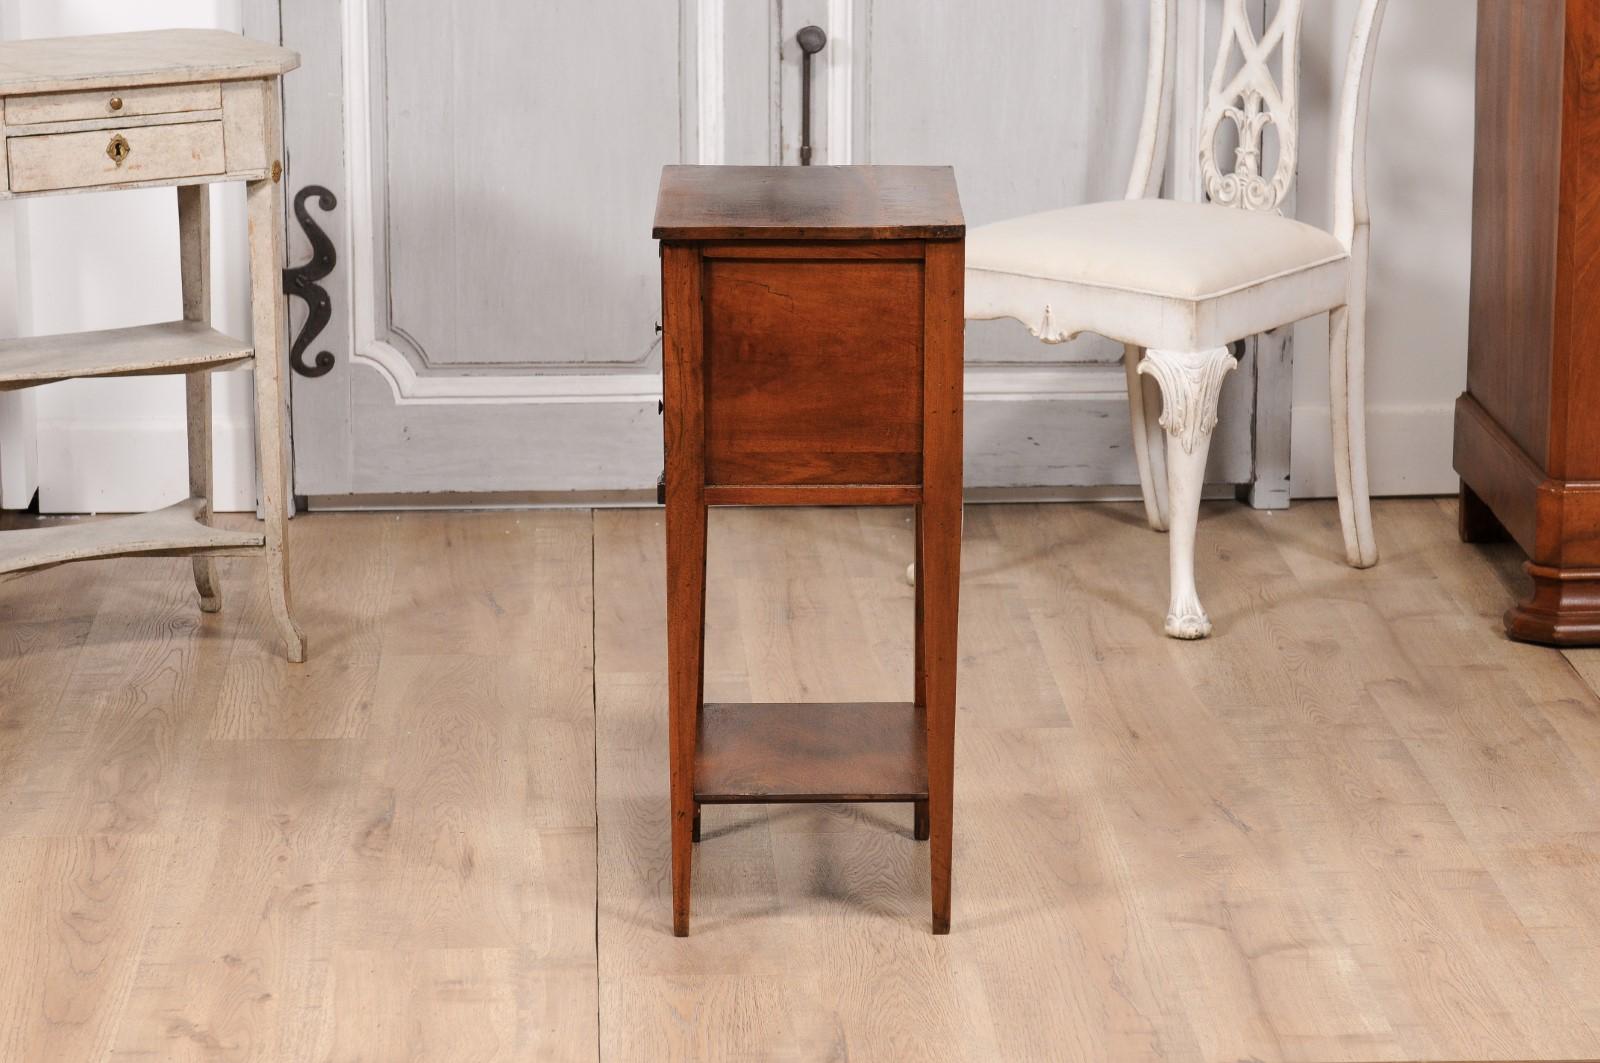 18th Century Italian Walnut Bedside Table with Three Drawers and Tapering Legs For Sale 7